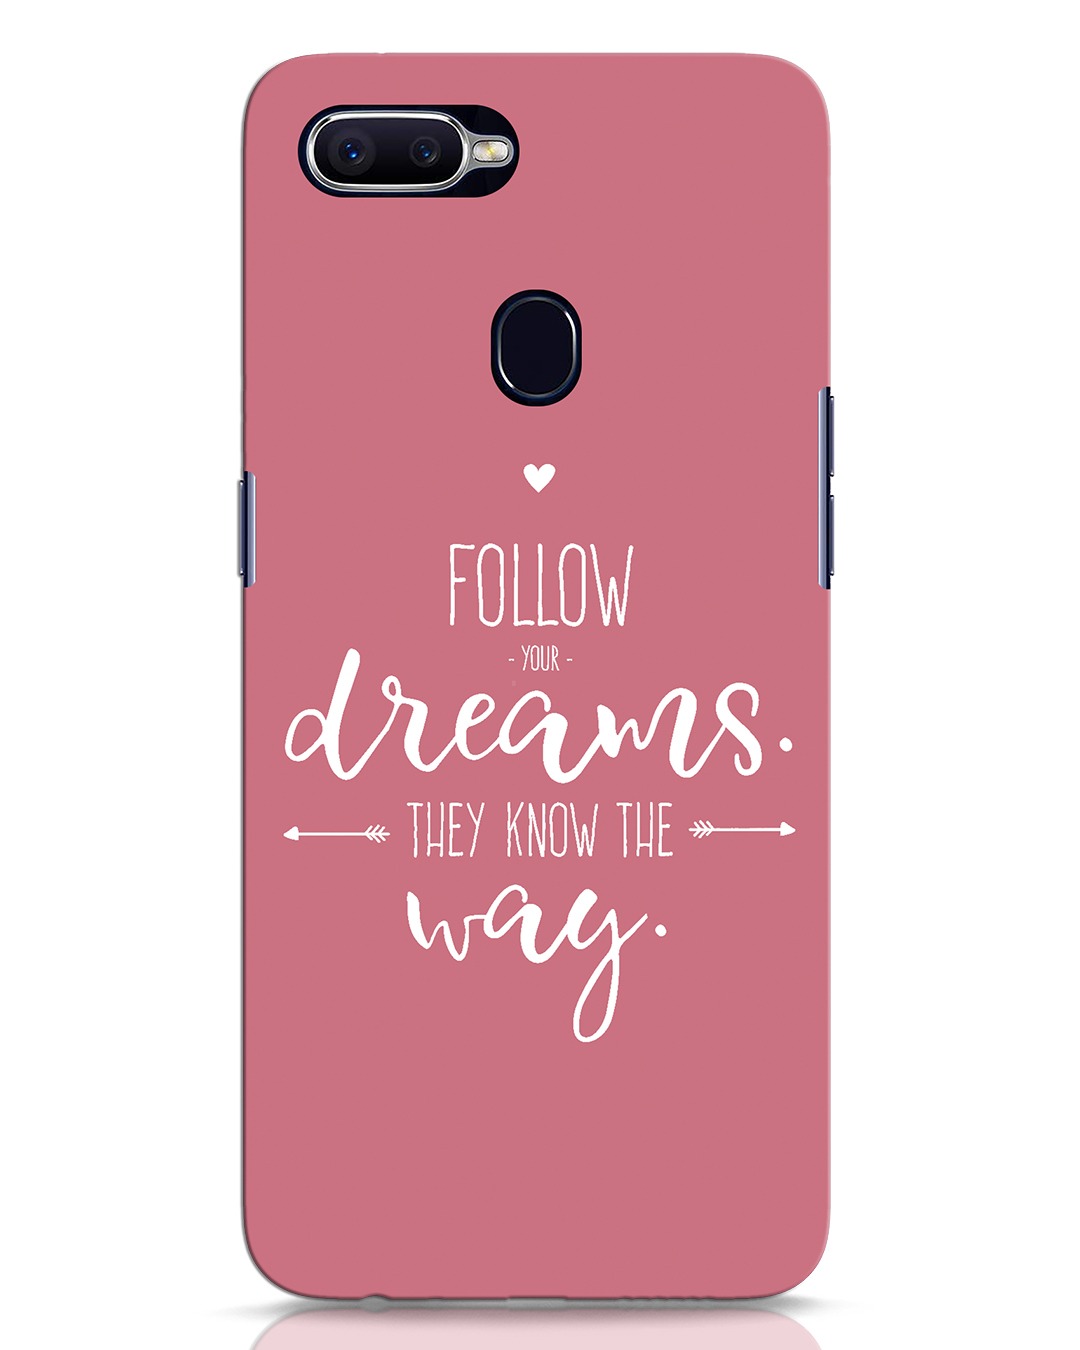 Buy They Know The Way Oppo F9 Pro Mobile Cover for Unisex Online at ...